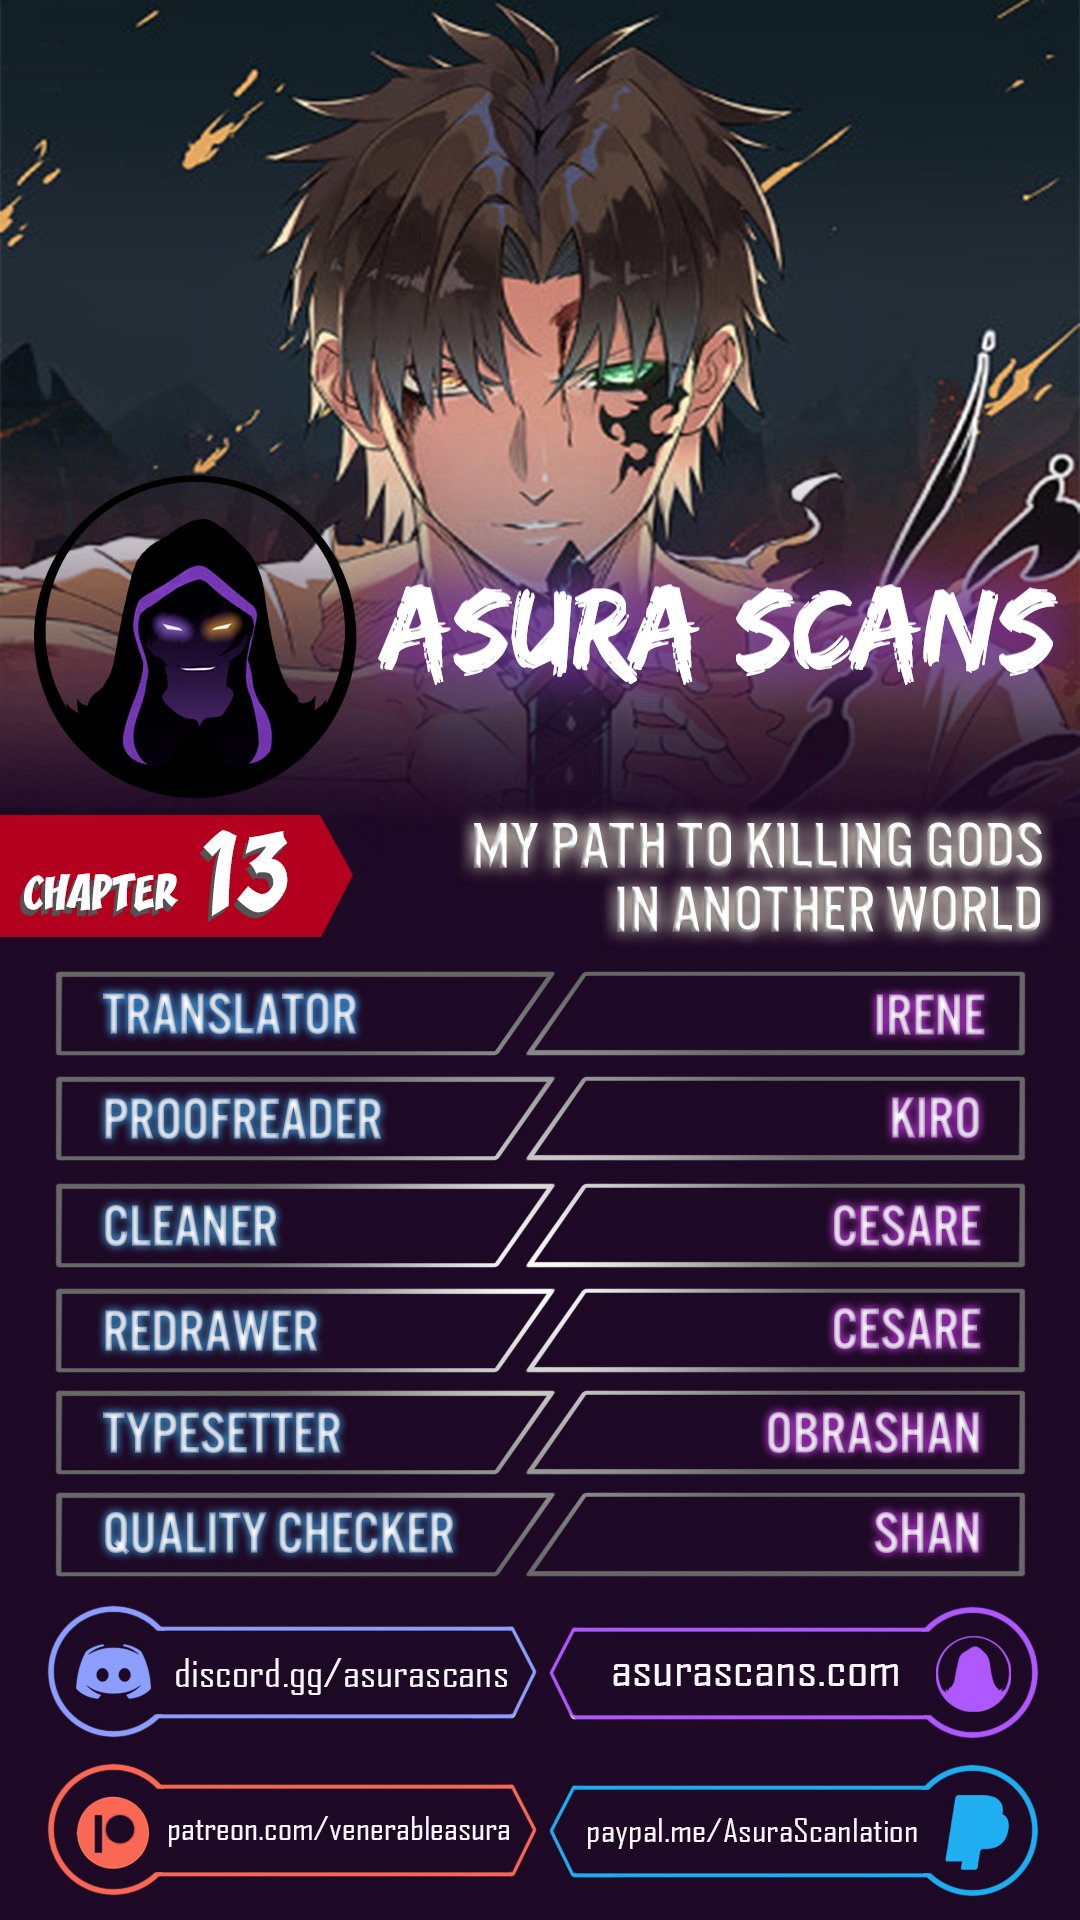 My Path to Killing Gods in Another World - Chapter 23164 - Image 1